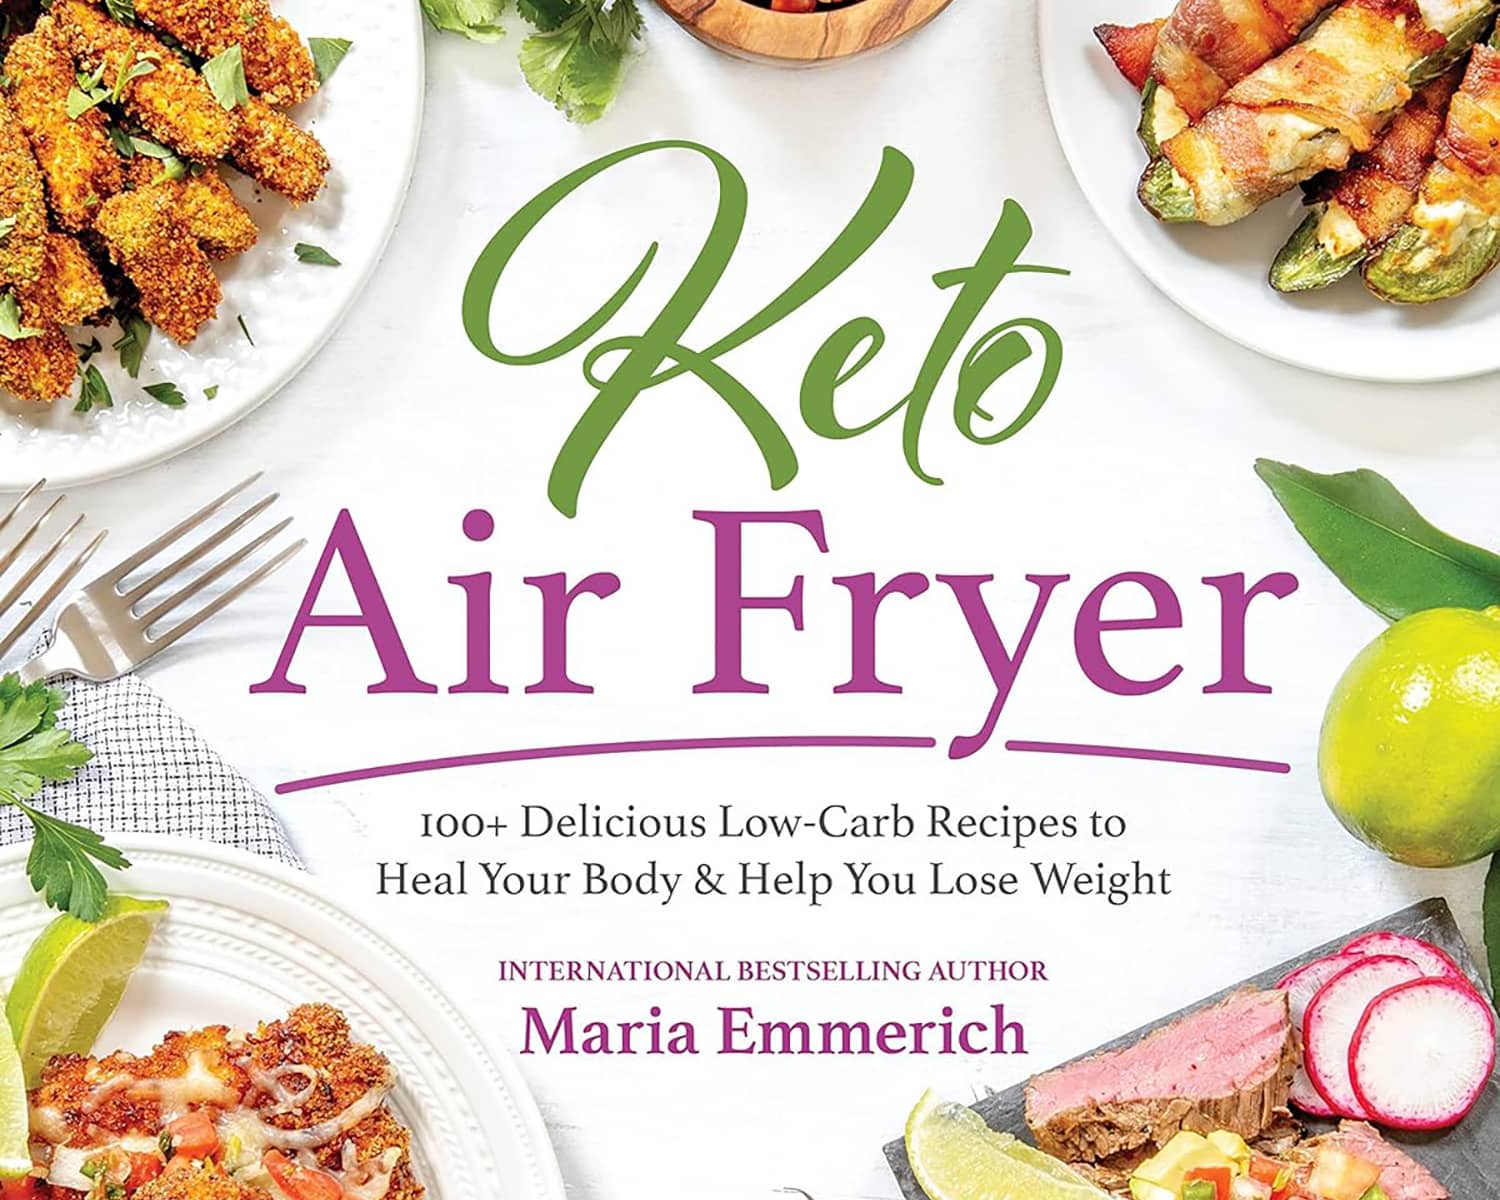 Keto Air Fryer 100 Delicious Low-Carb Recipes to Heal Your Body Help You Lose Weight